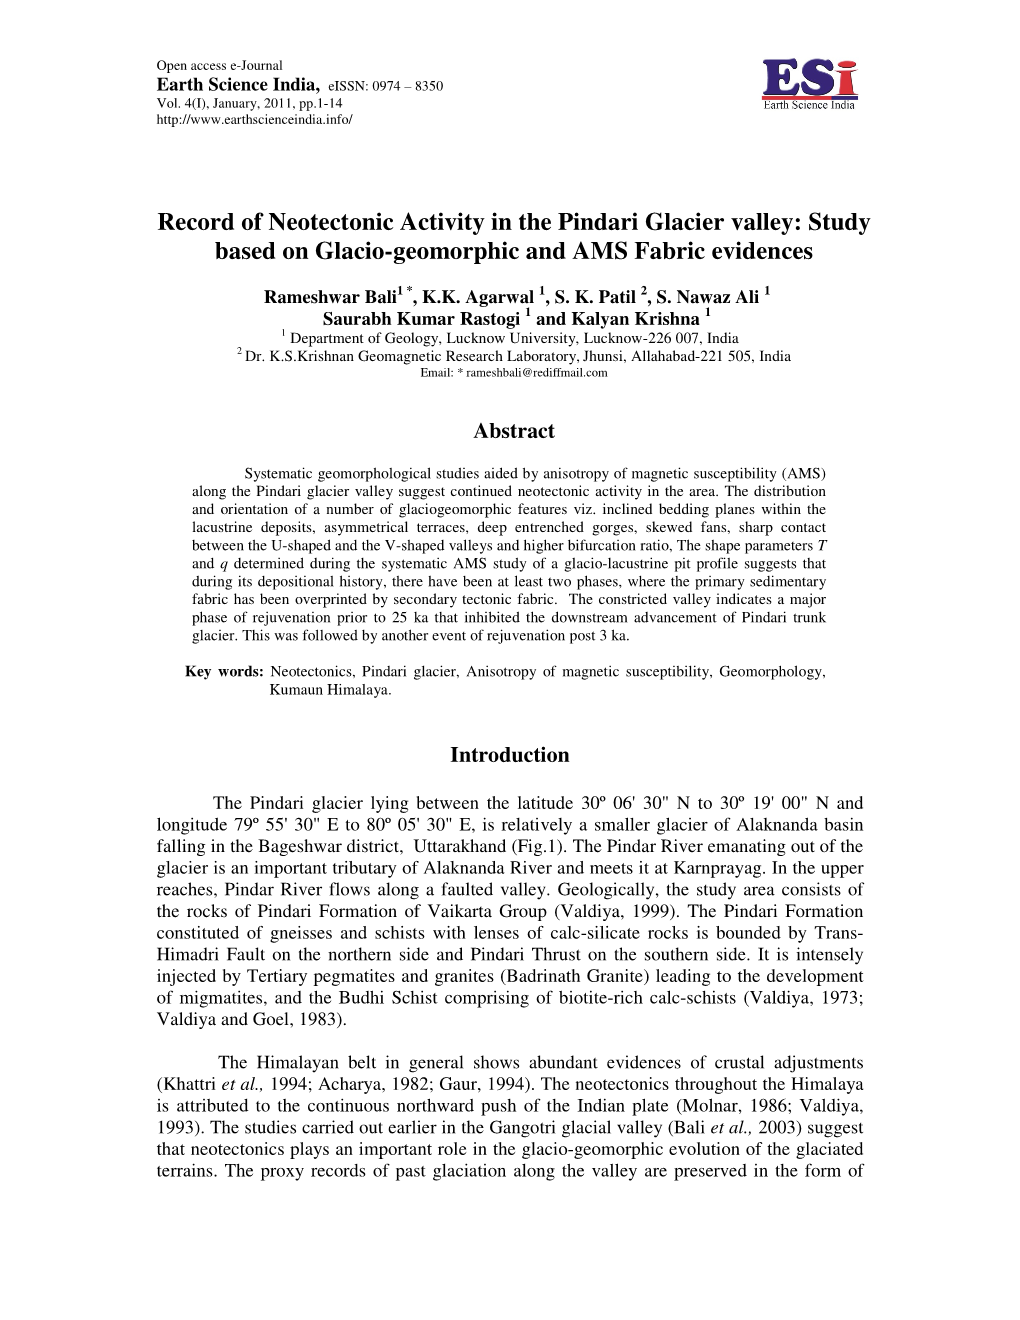 Record of Neotectonic Activity in the Pindari Glacier Valley: Study Based on Glacio-Geomorphic and AMS Fabric Evidences